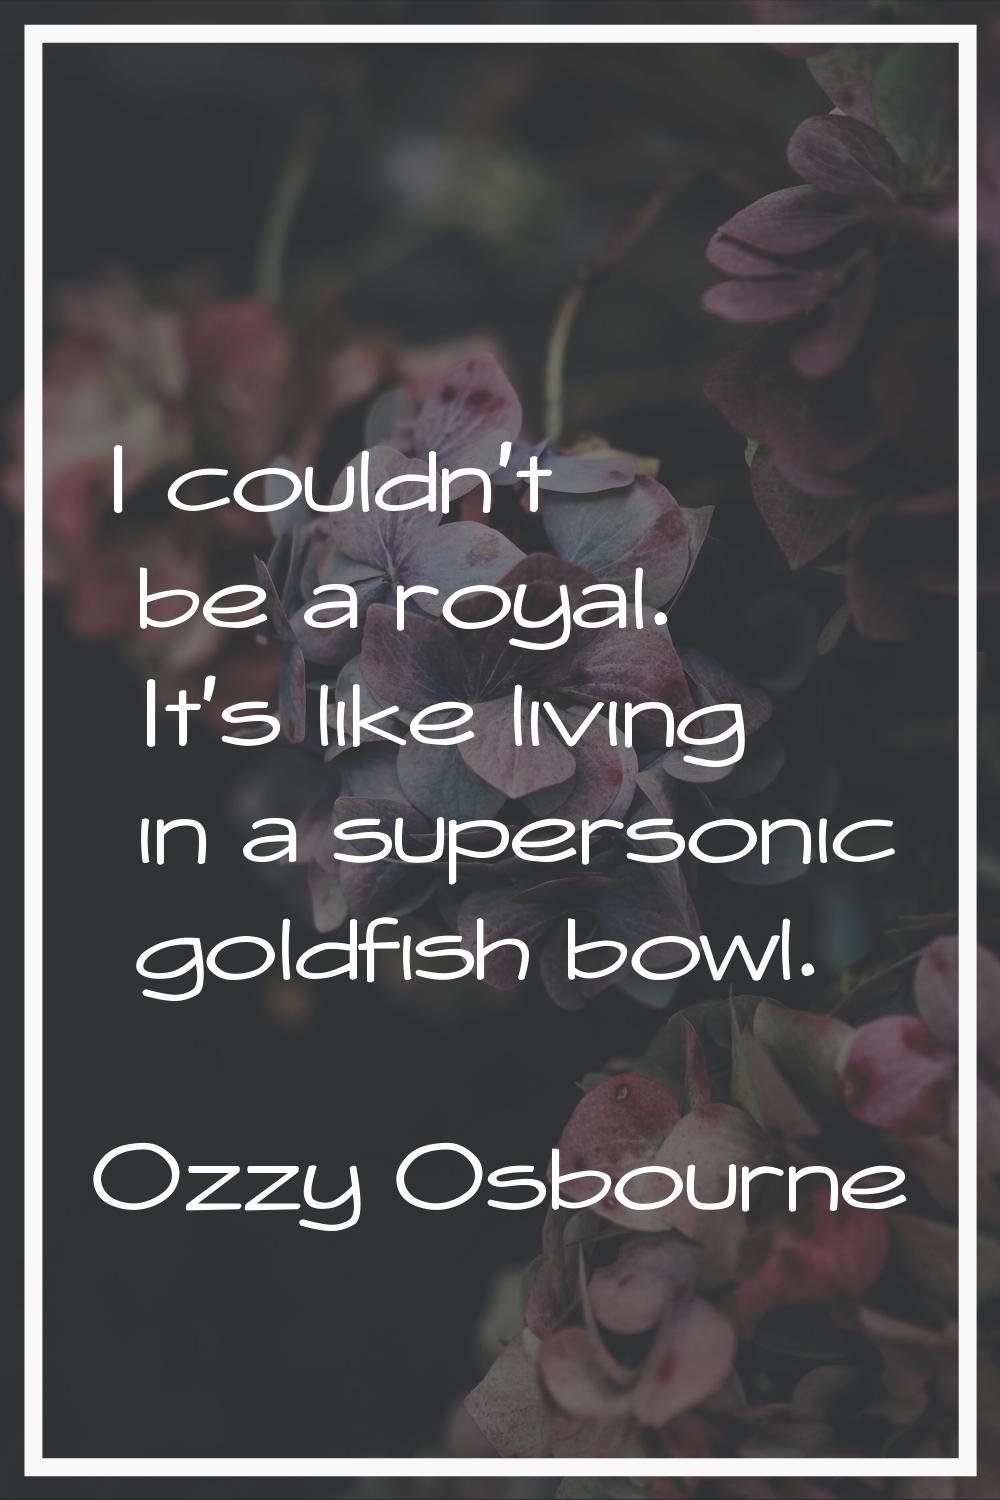 I couldn't be a royal. It's like living in a supersonic goldfish bowl.